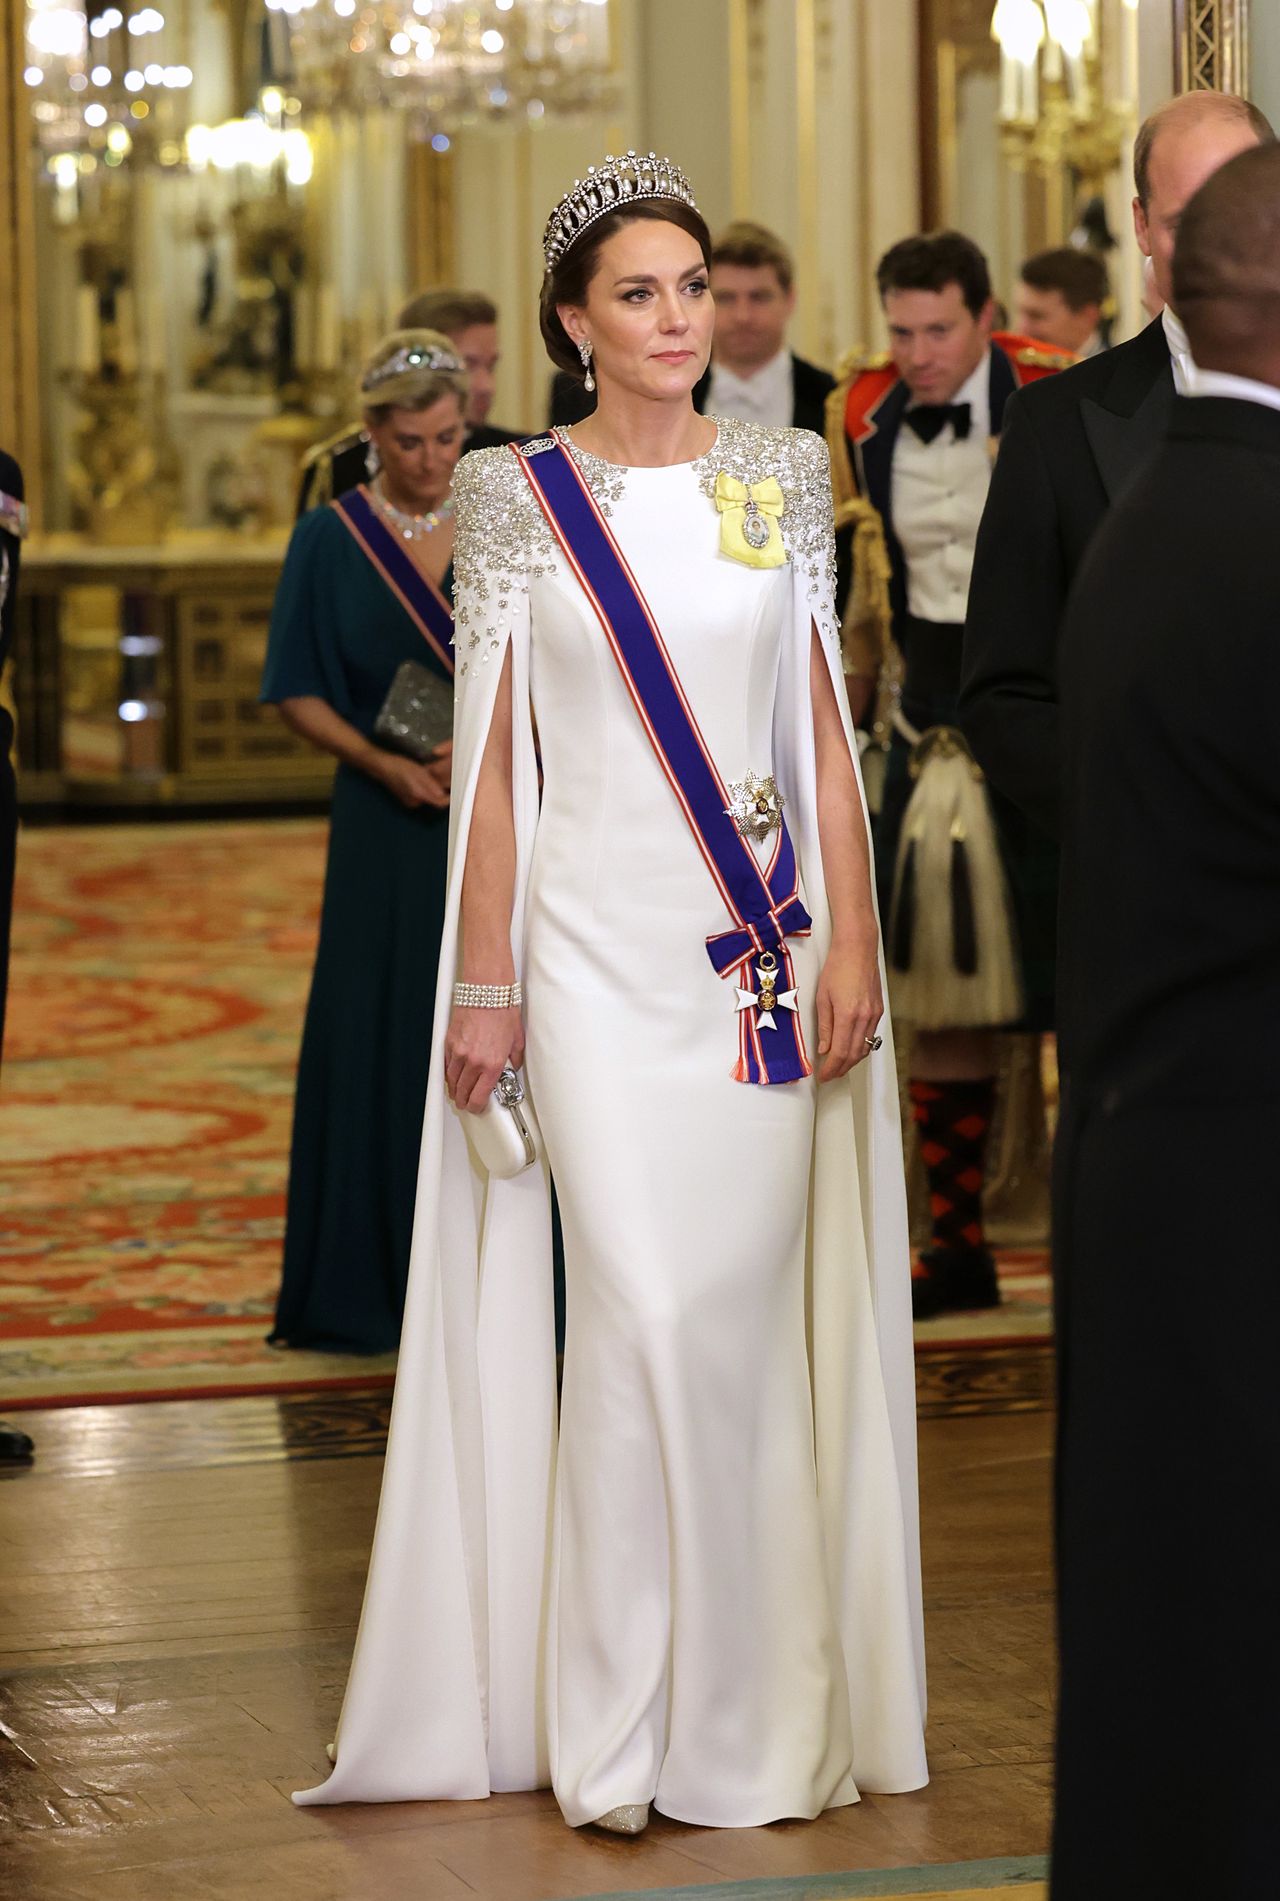 Princess Kate at the banquet in Buckingham Palace